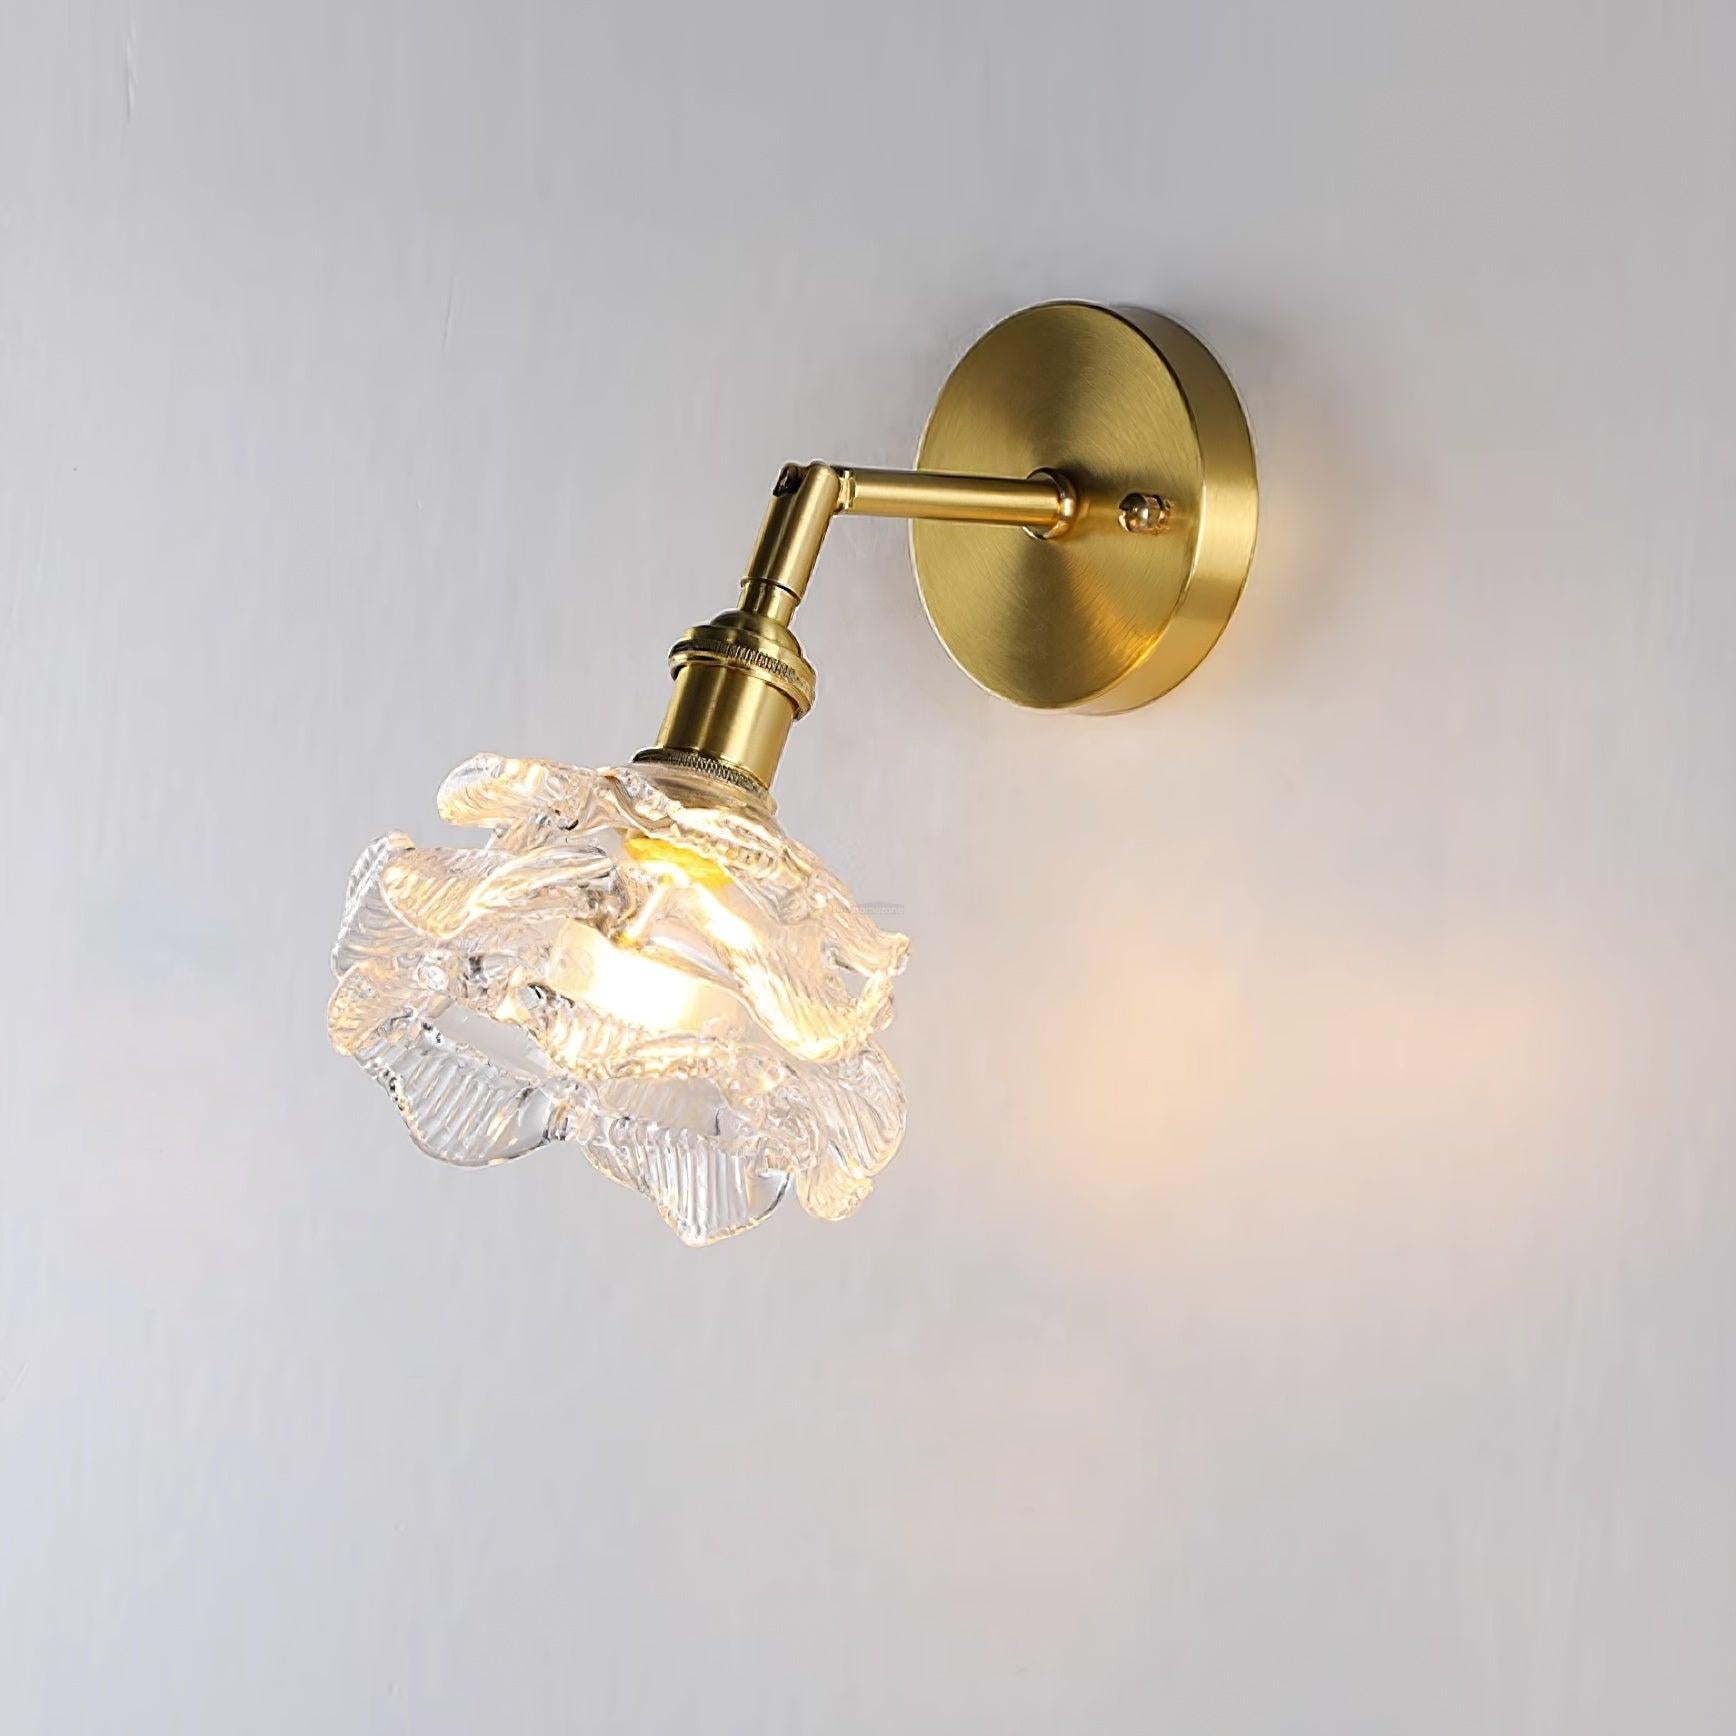 Kano Brass Wall Sconce